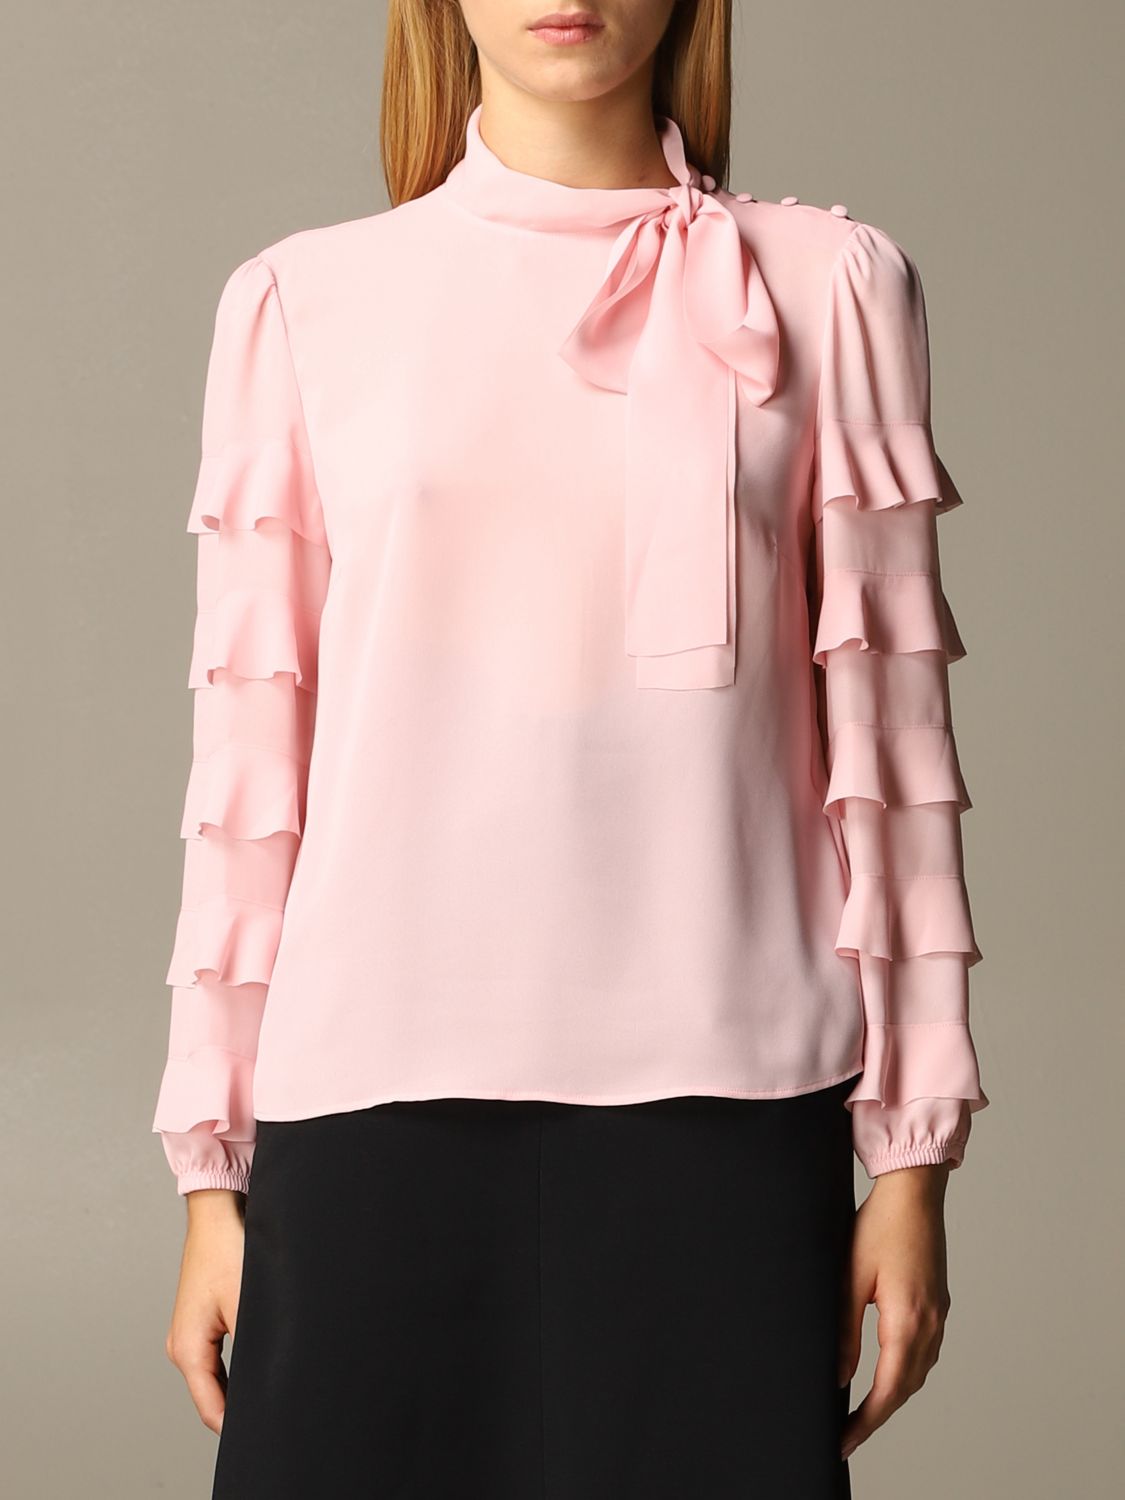 Red Valentino Blouse Valentino shirt in silk with ruffles and bow - Pink | Red Valentino top UR3ABD95 49G online on GIGLIO.COM